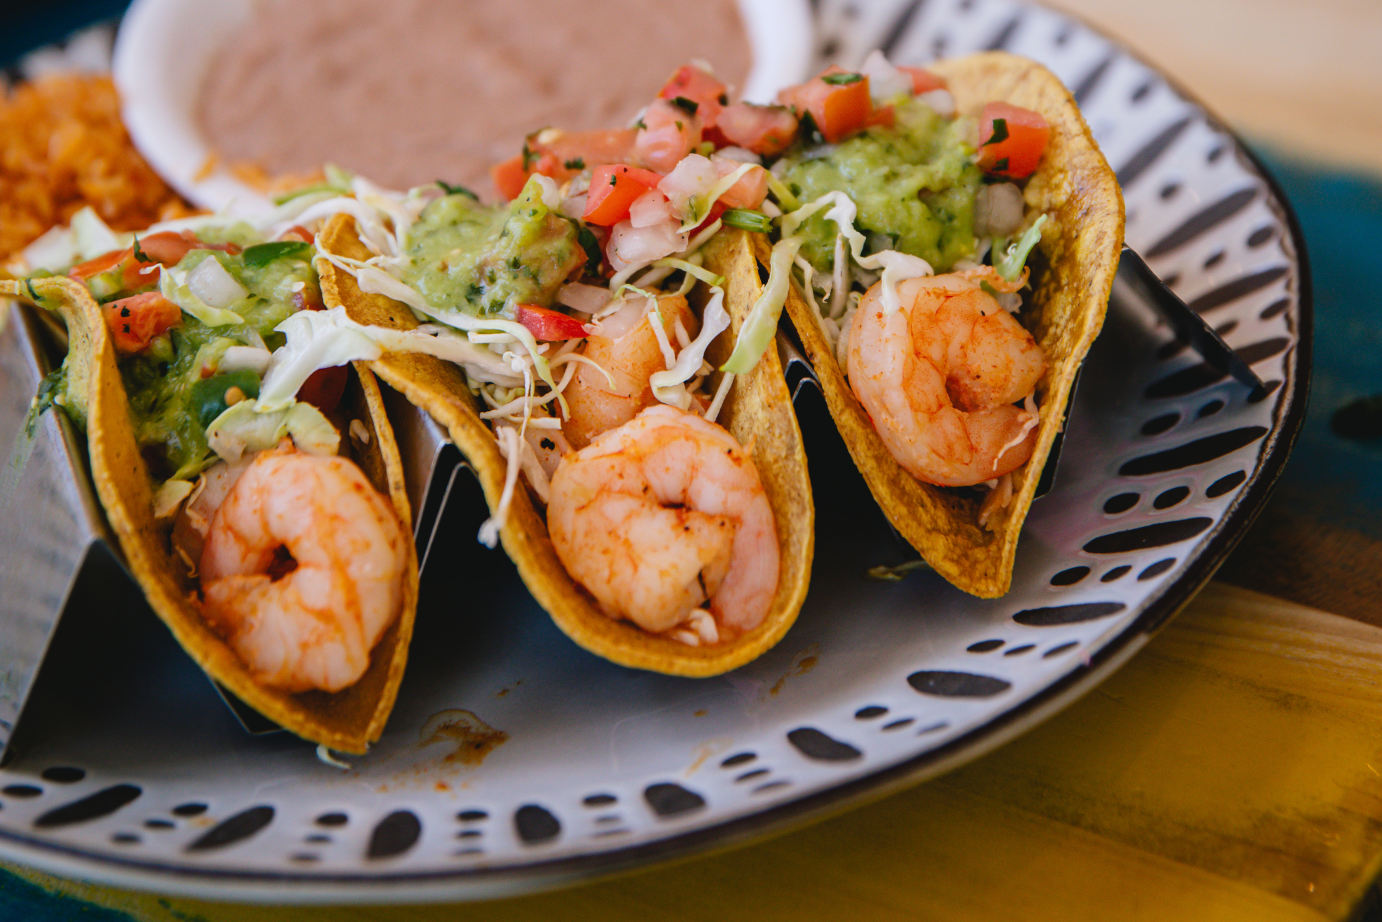 Three tacos with shrimps and salad